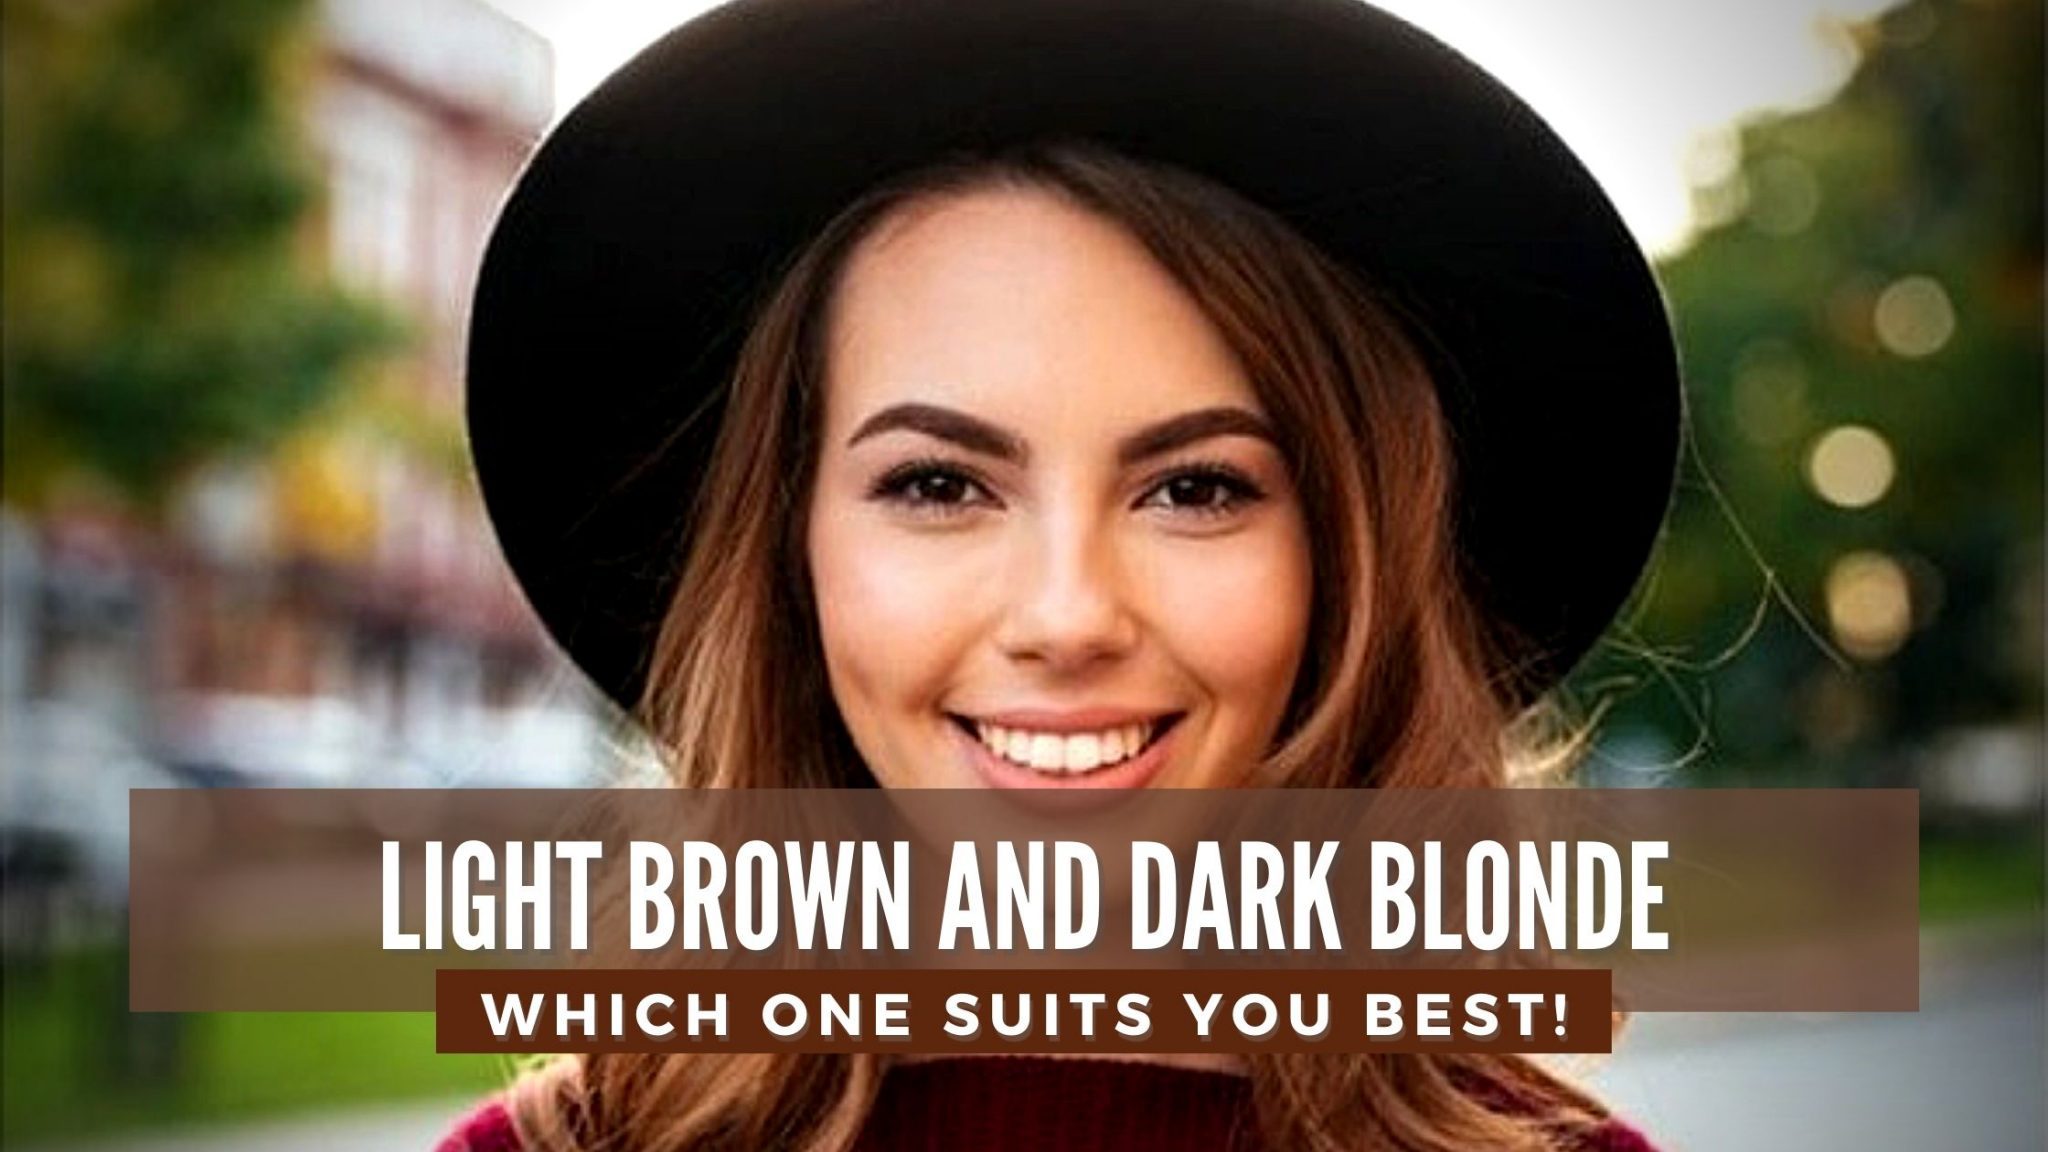 Dark Blonde Hair vs Light Brown, Which one suits you best!